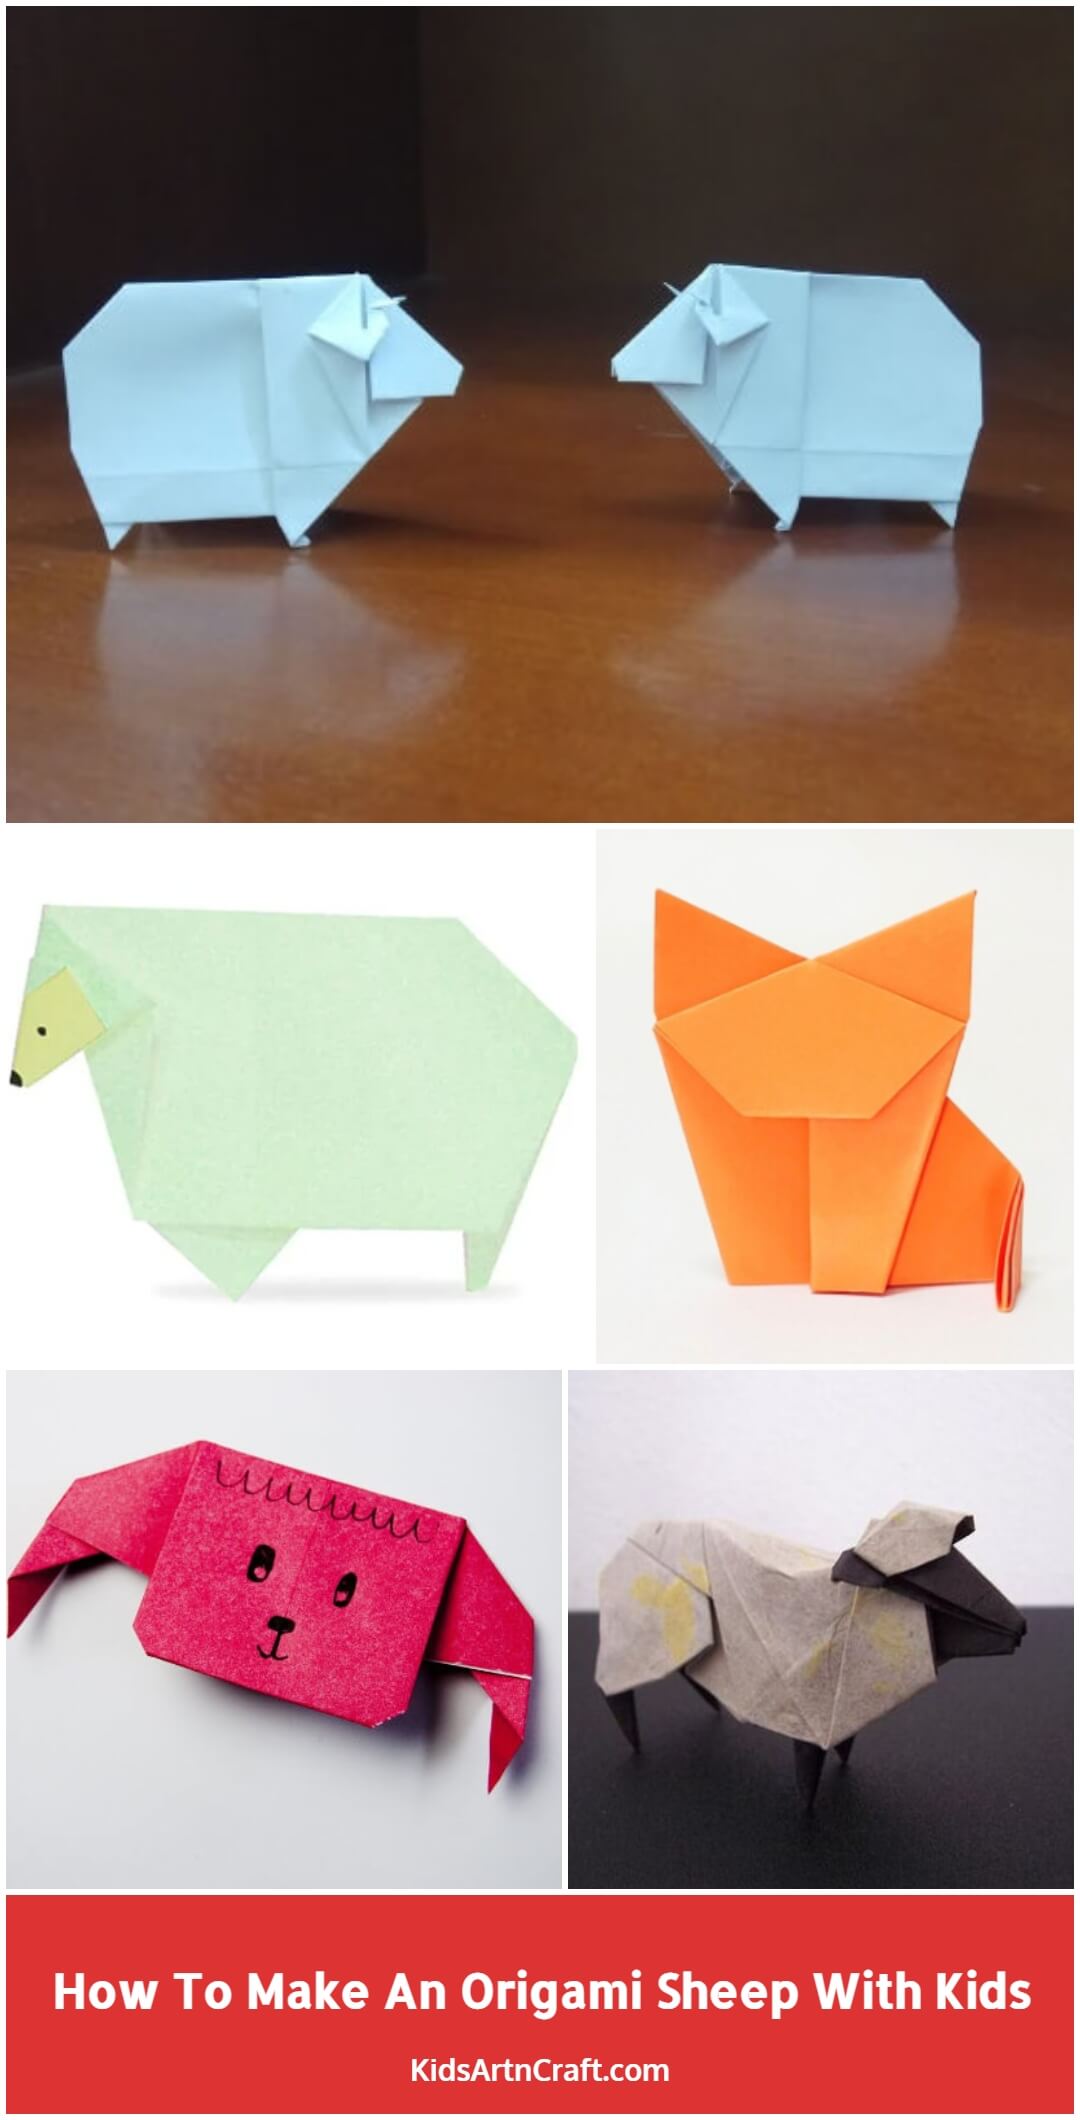 How To Make An Origami Sheep With Kids